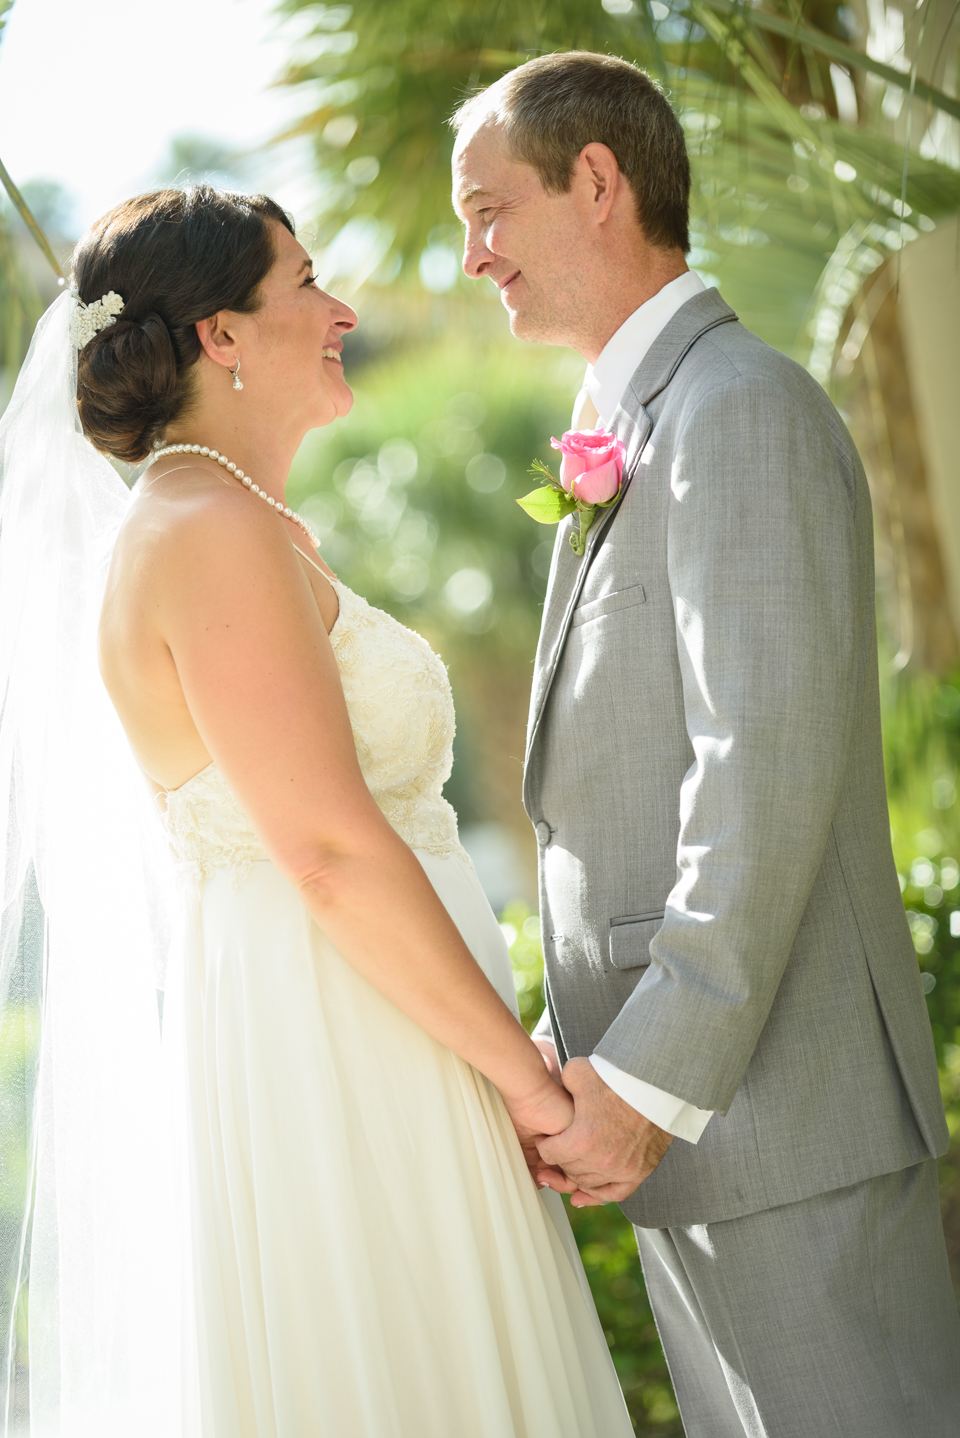 bride and groom face each other smiling and holding hands before their wedding